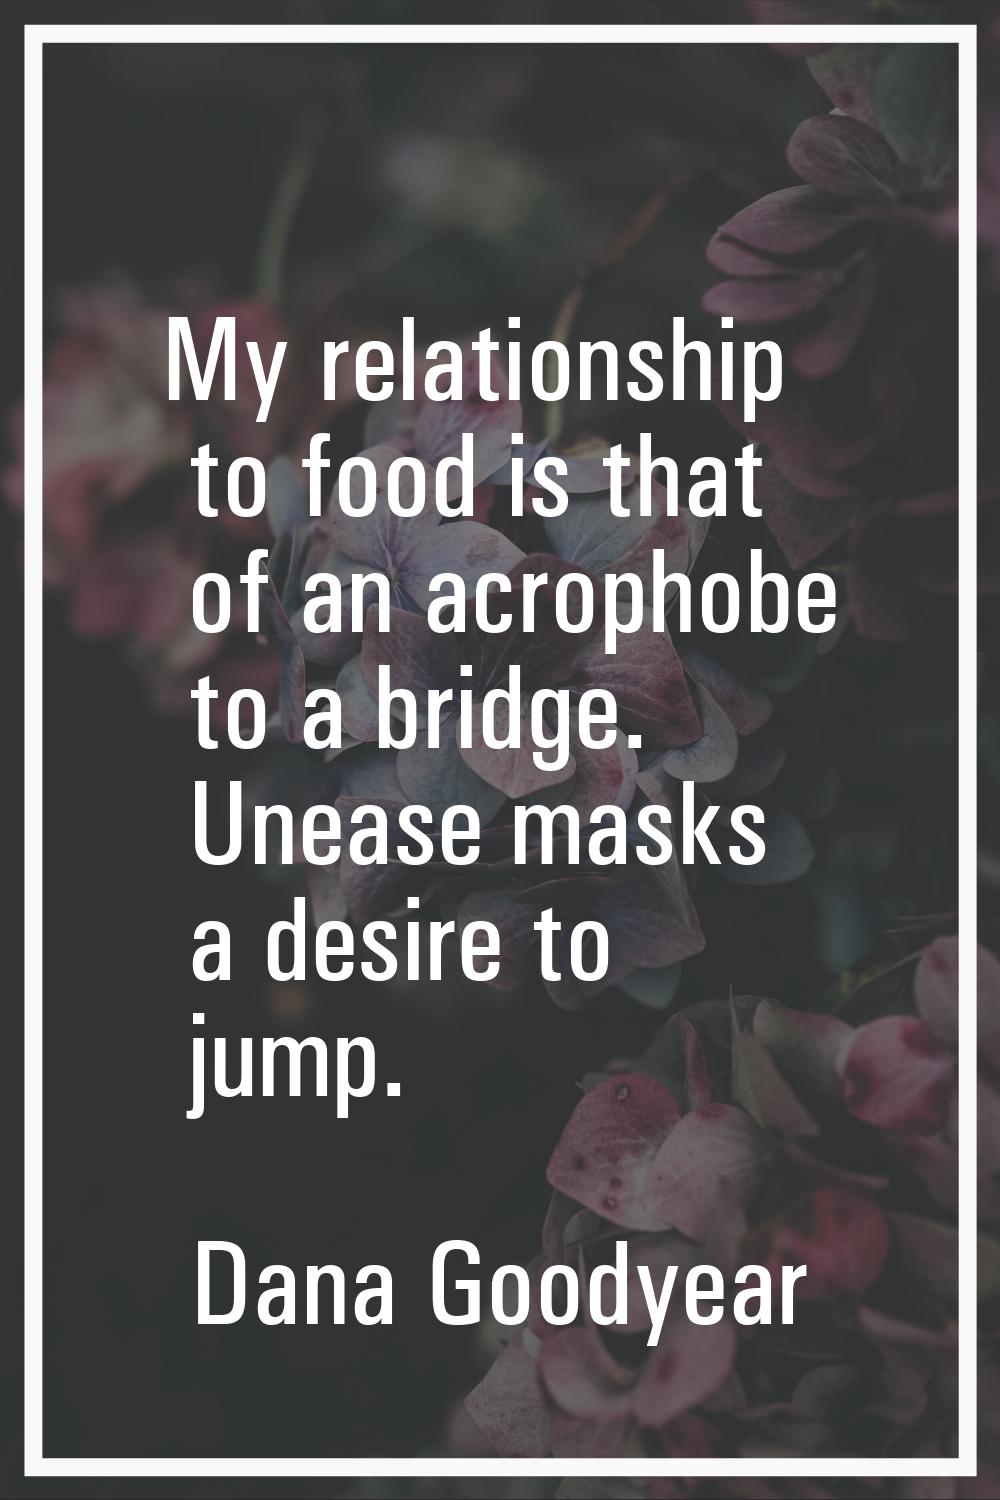 My relationship to food is that of an acrophobe to a bridge. Unease masks a desire to jump.